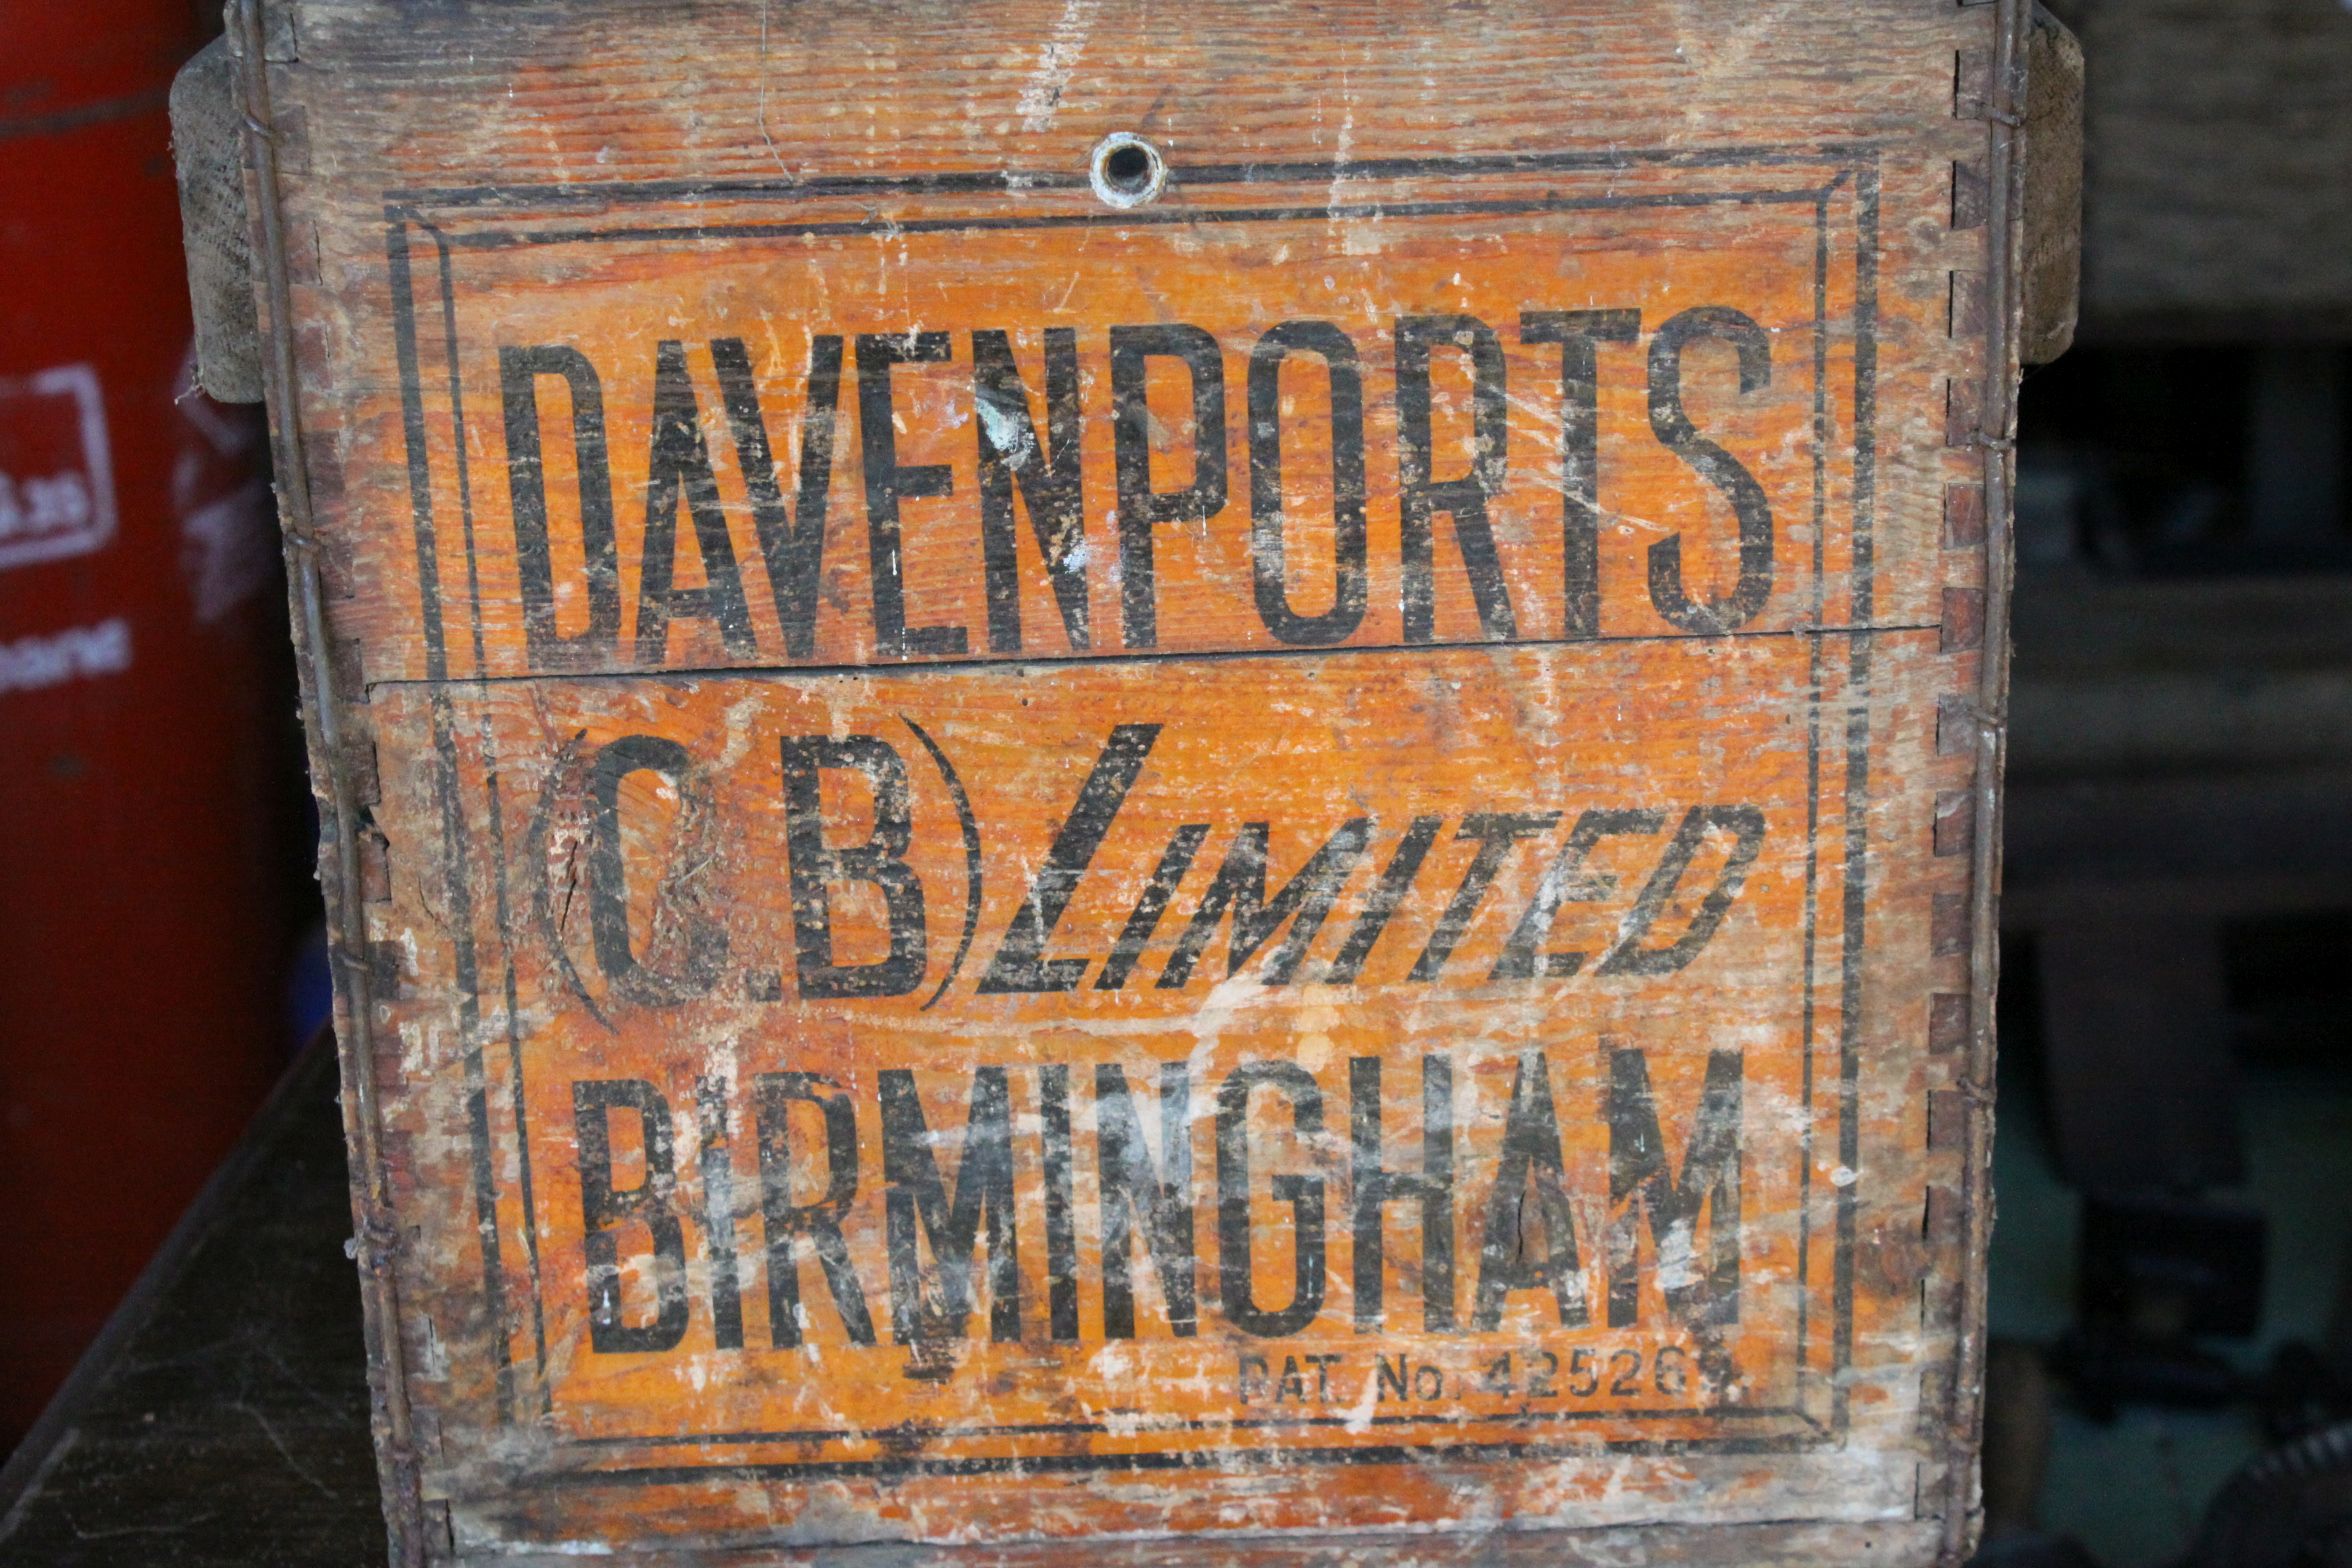 Wooden ' Davenports ' Beer Crate together with Set of Bellows - Image 2 of 3